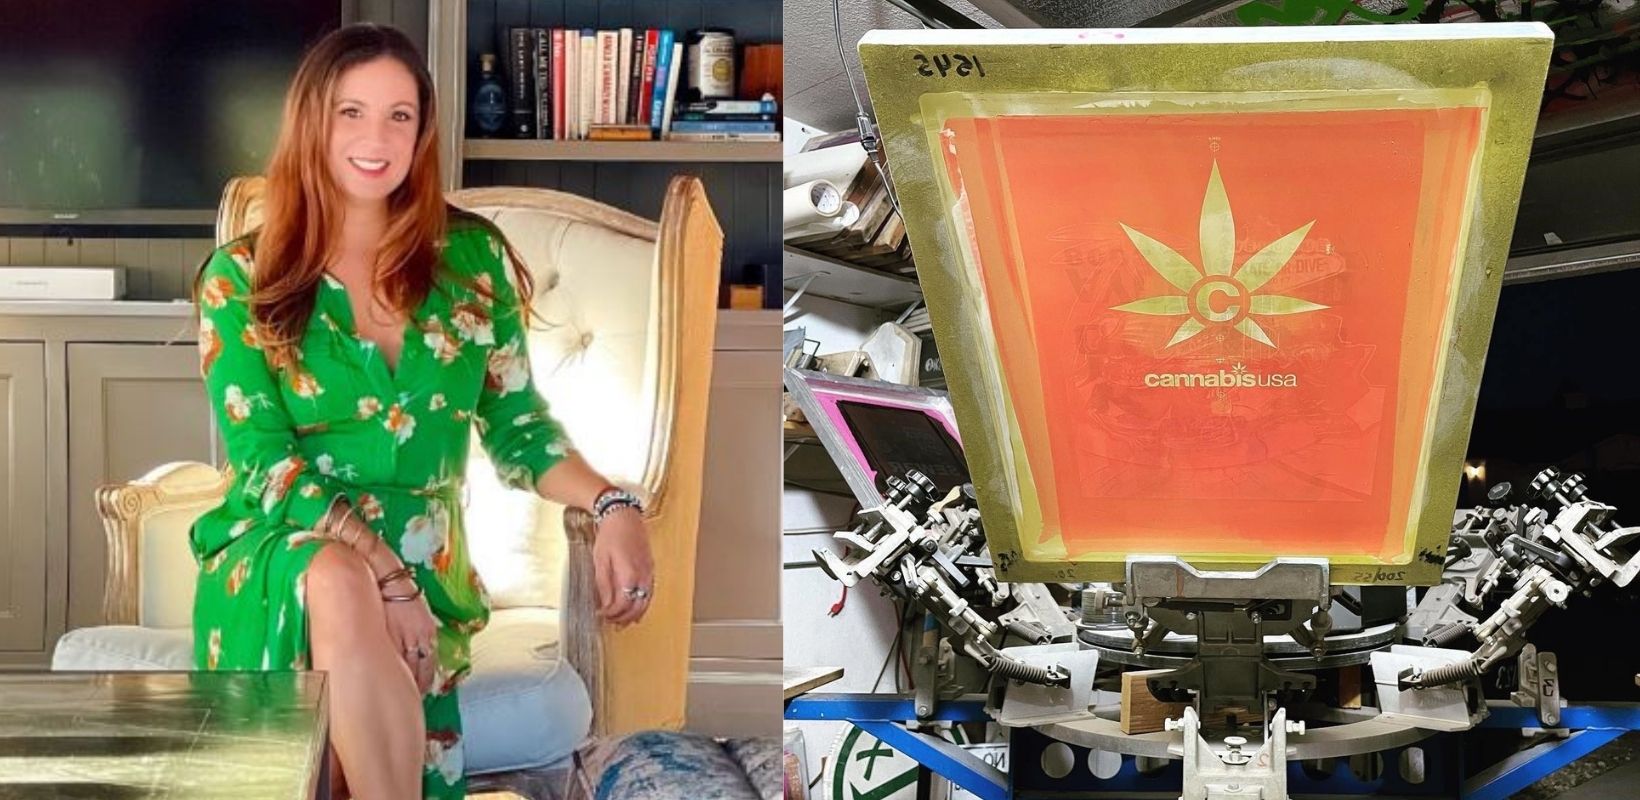 Photo for: Lucia Cifonelli on the Secrets of Marketing in the Cannabis Industry